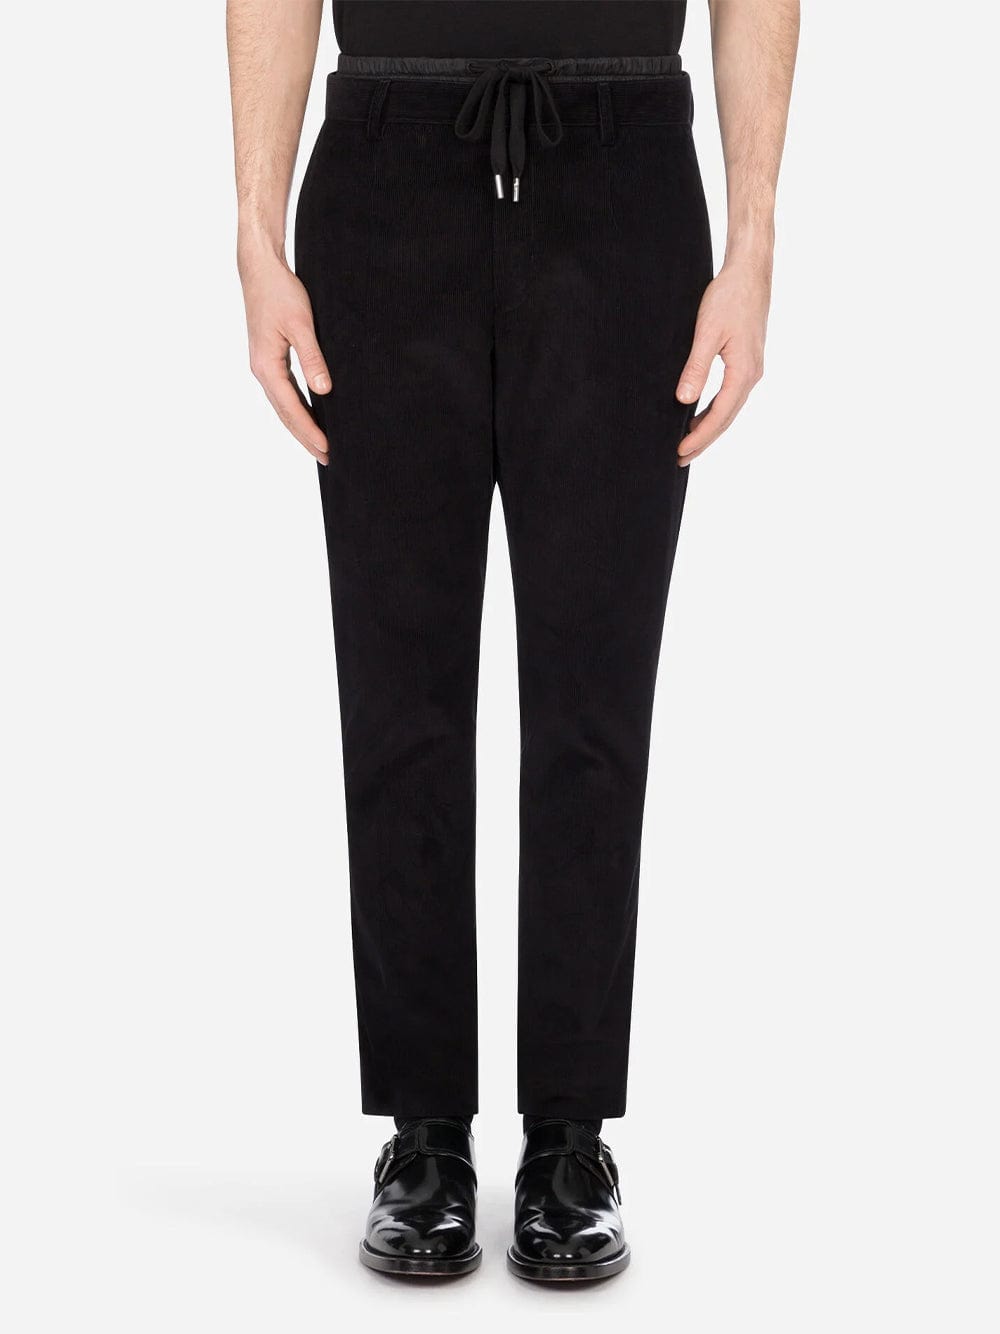 Dolce&Gabbana Fitted Pants